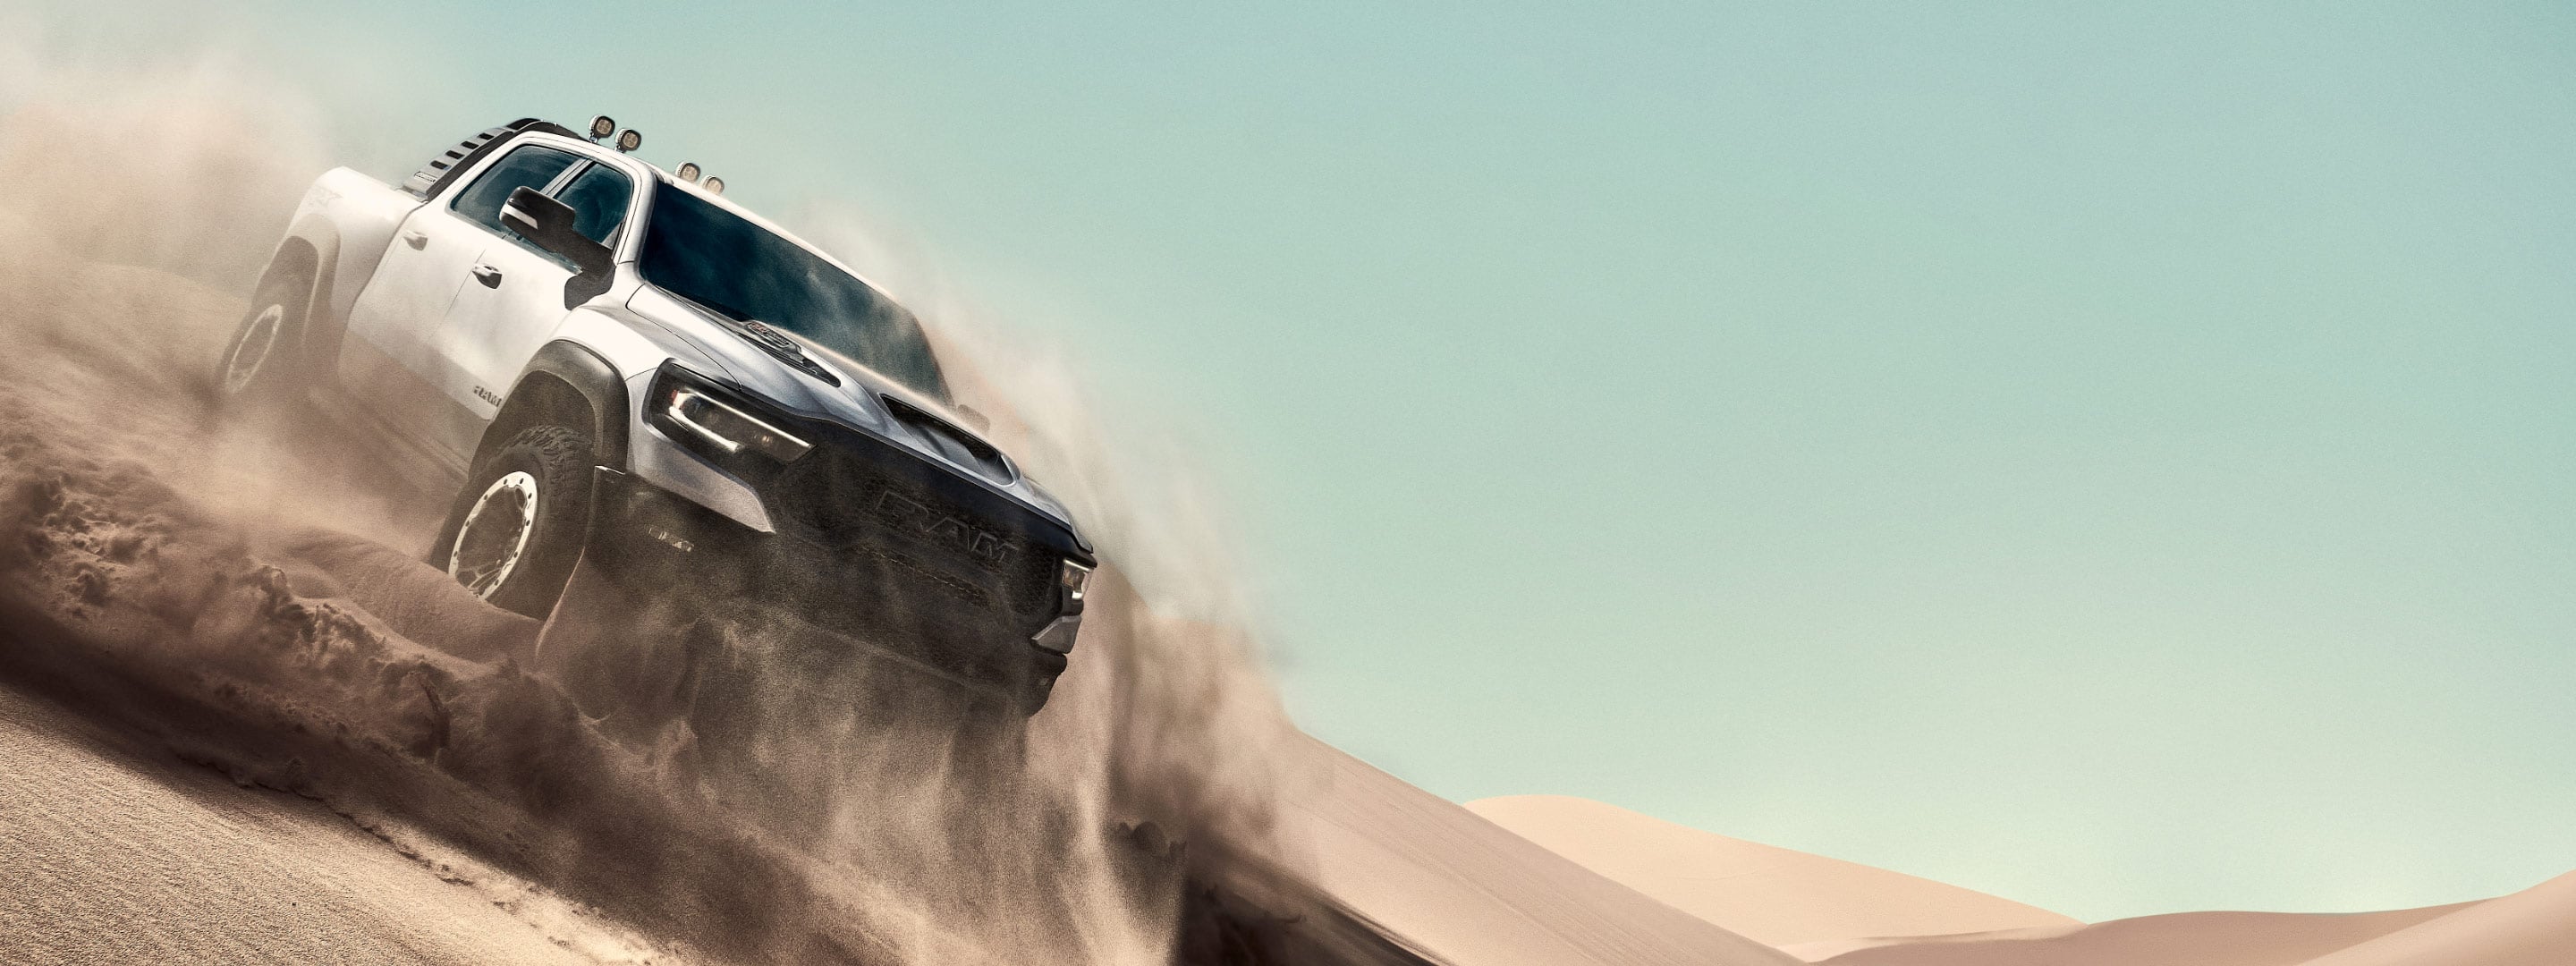 The 2021 Ram 1500 TRX being driven over a sand dune.